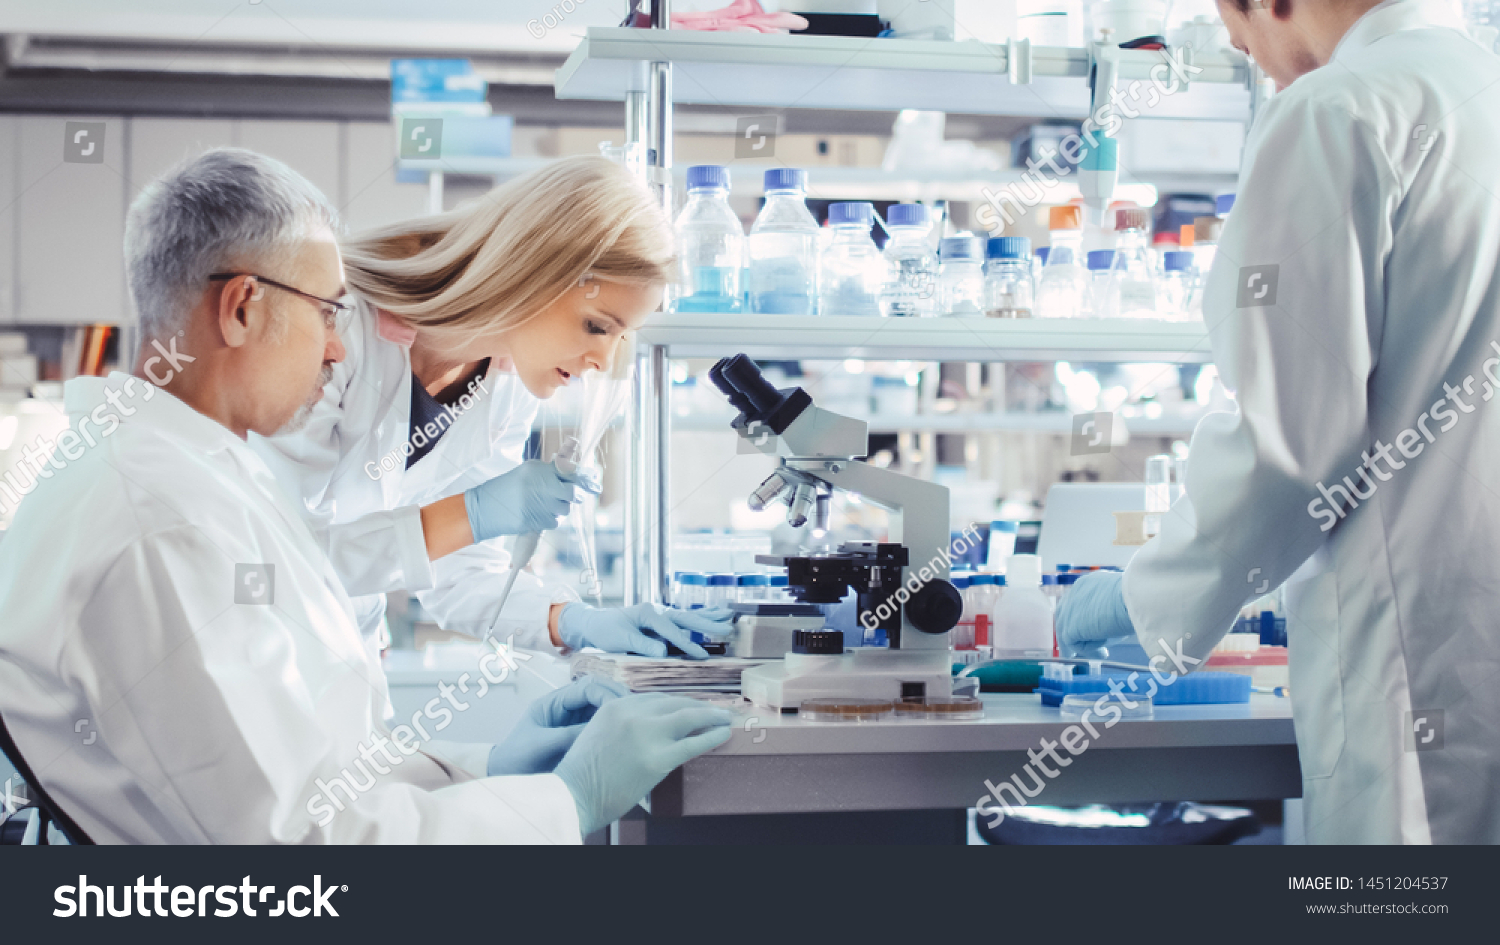 Group of Research Scientists in White Coats are Working with Microscope in a Modern High-Tech Laboratory. Genetics and Pharmaceutical Studies and Researches. #1451204537